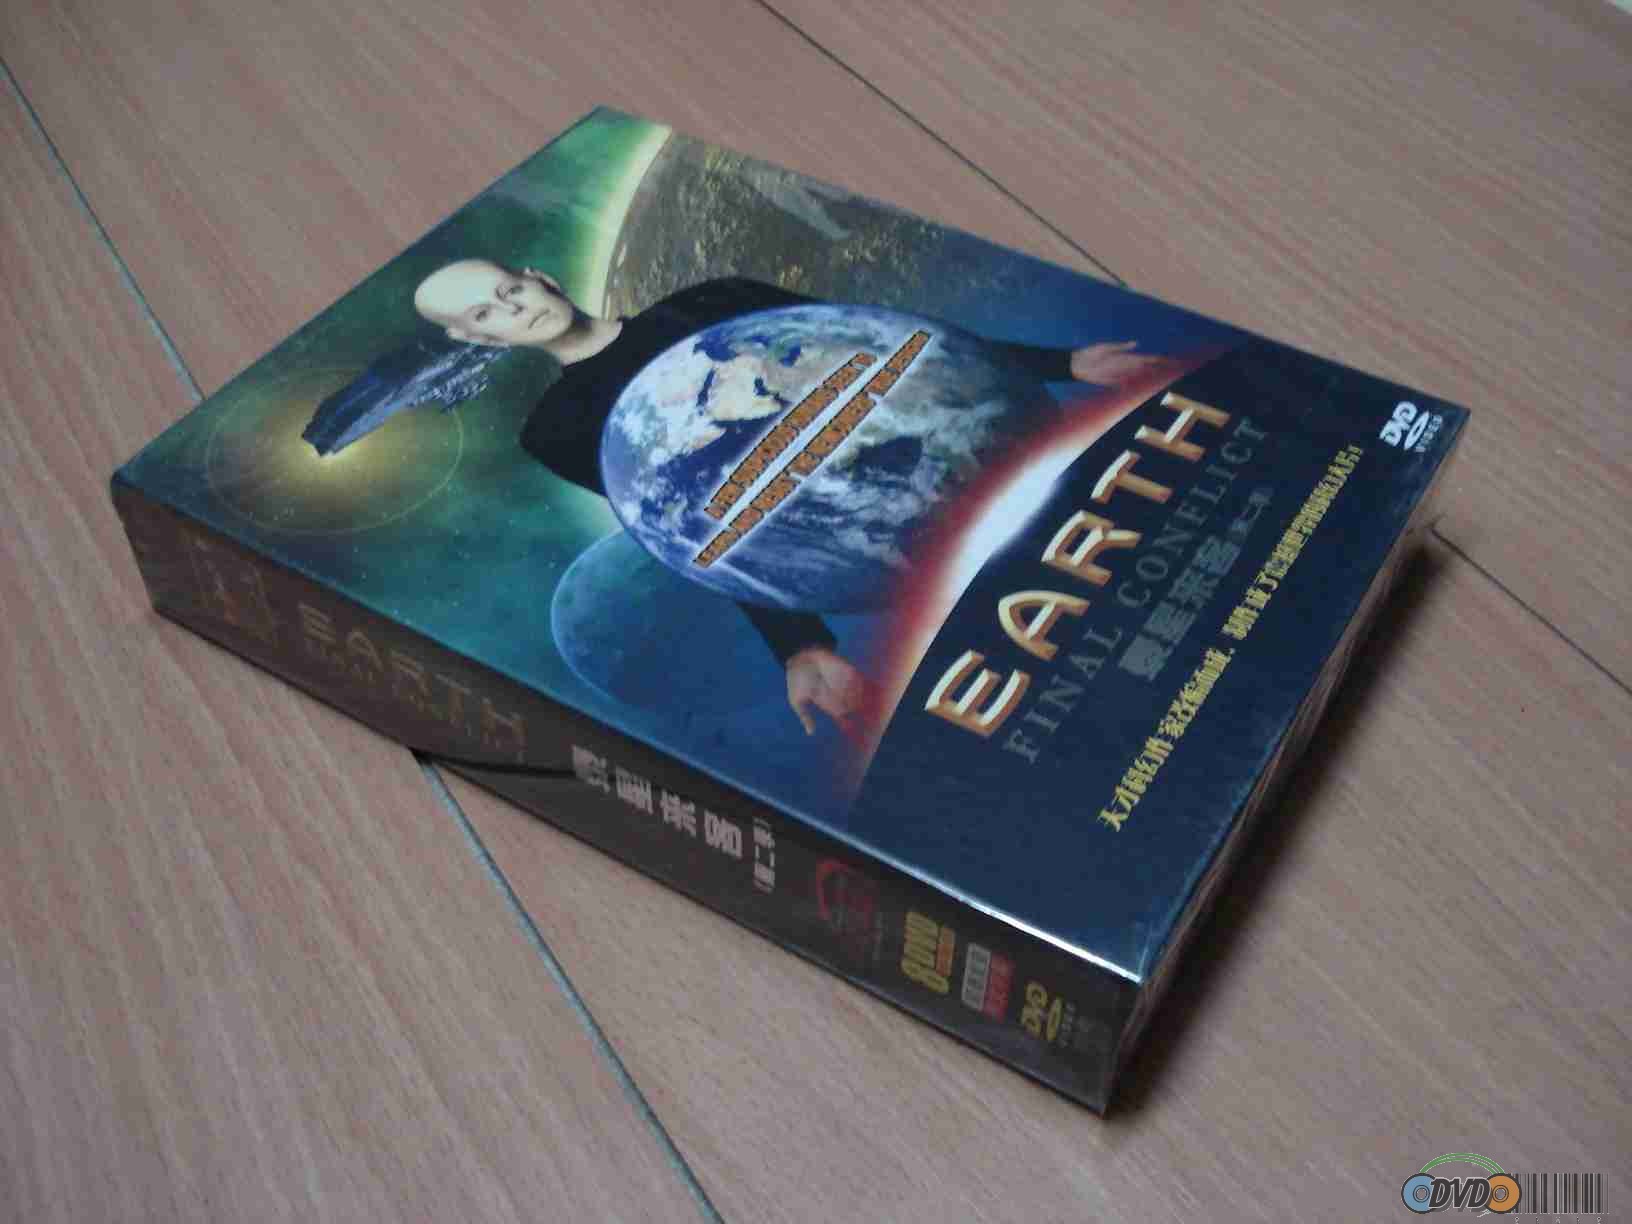 Earth Final Conflict COMPLETE SEASONS 2 DVD BOX SET